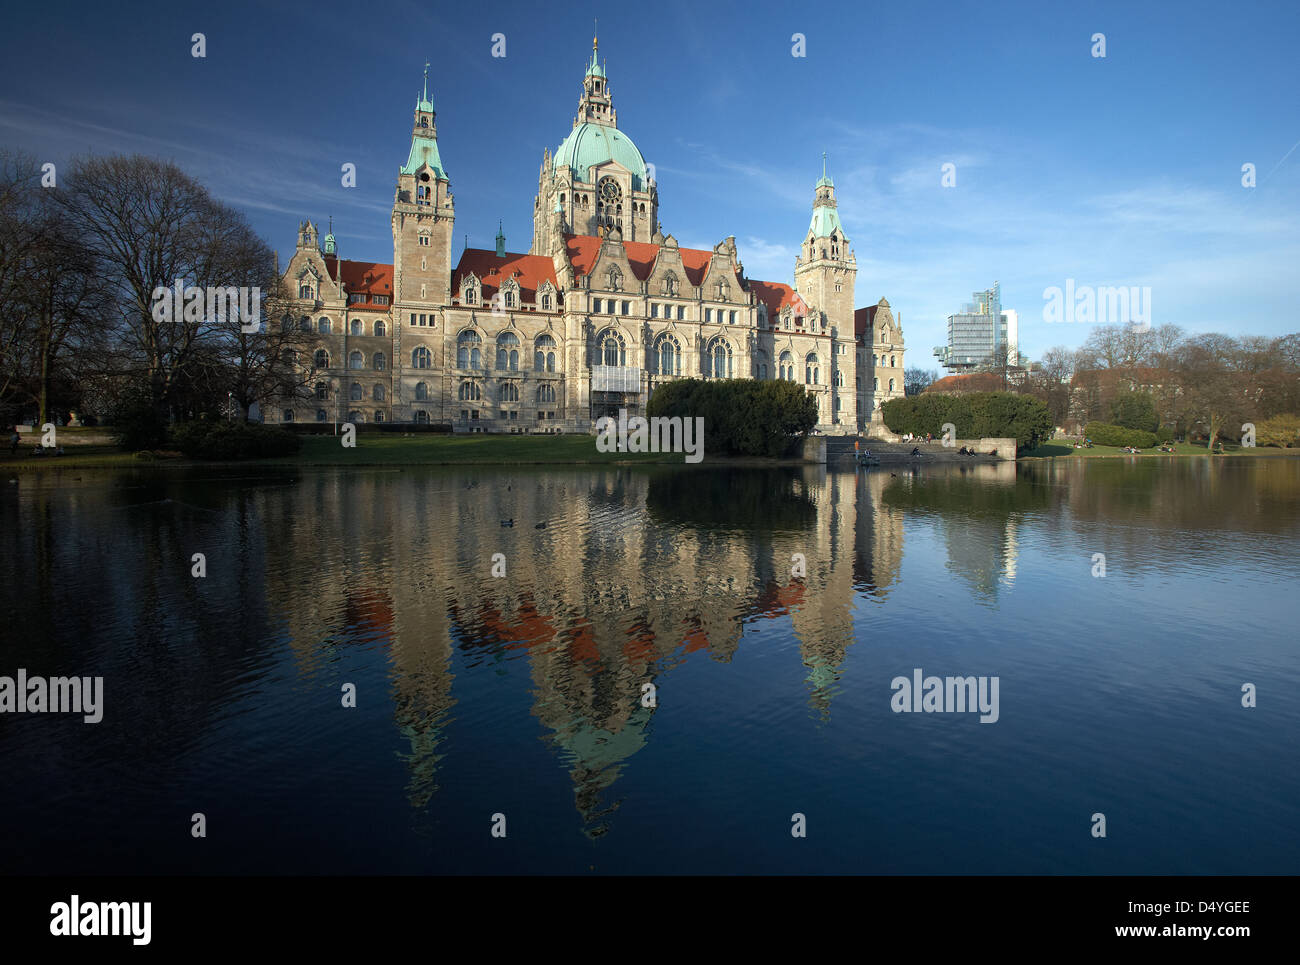 Hannover, Germany, New Town Hall of Hanover on Masch pond Stock Photo